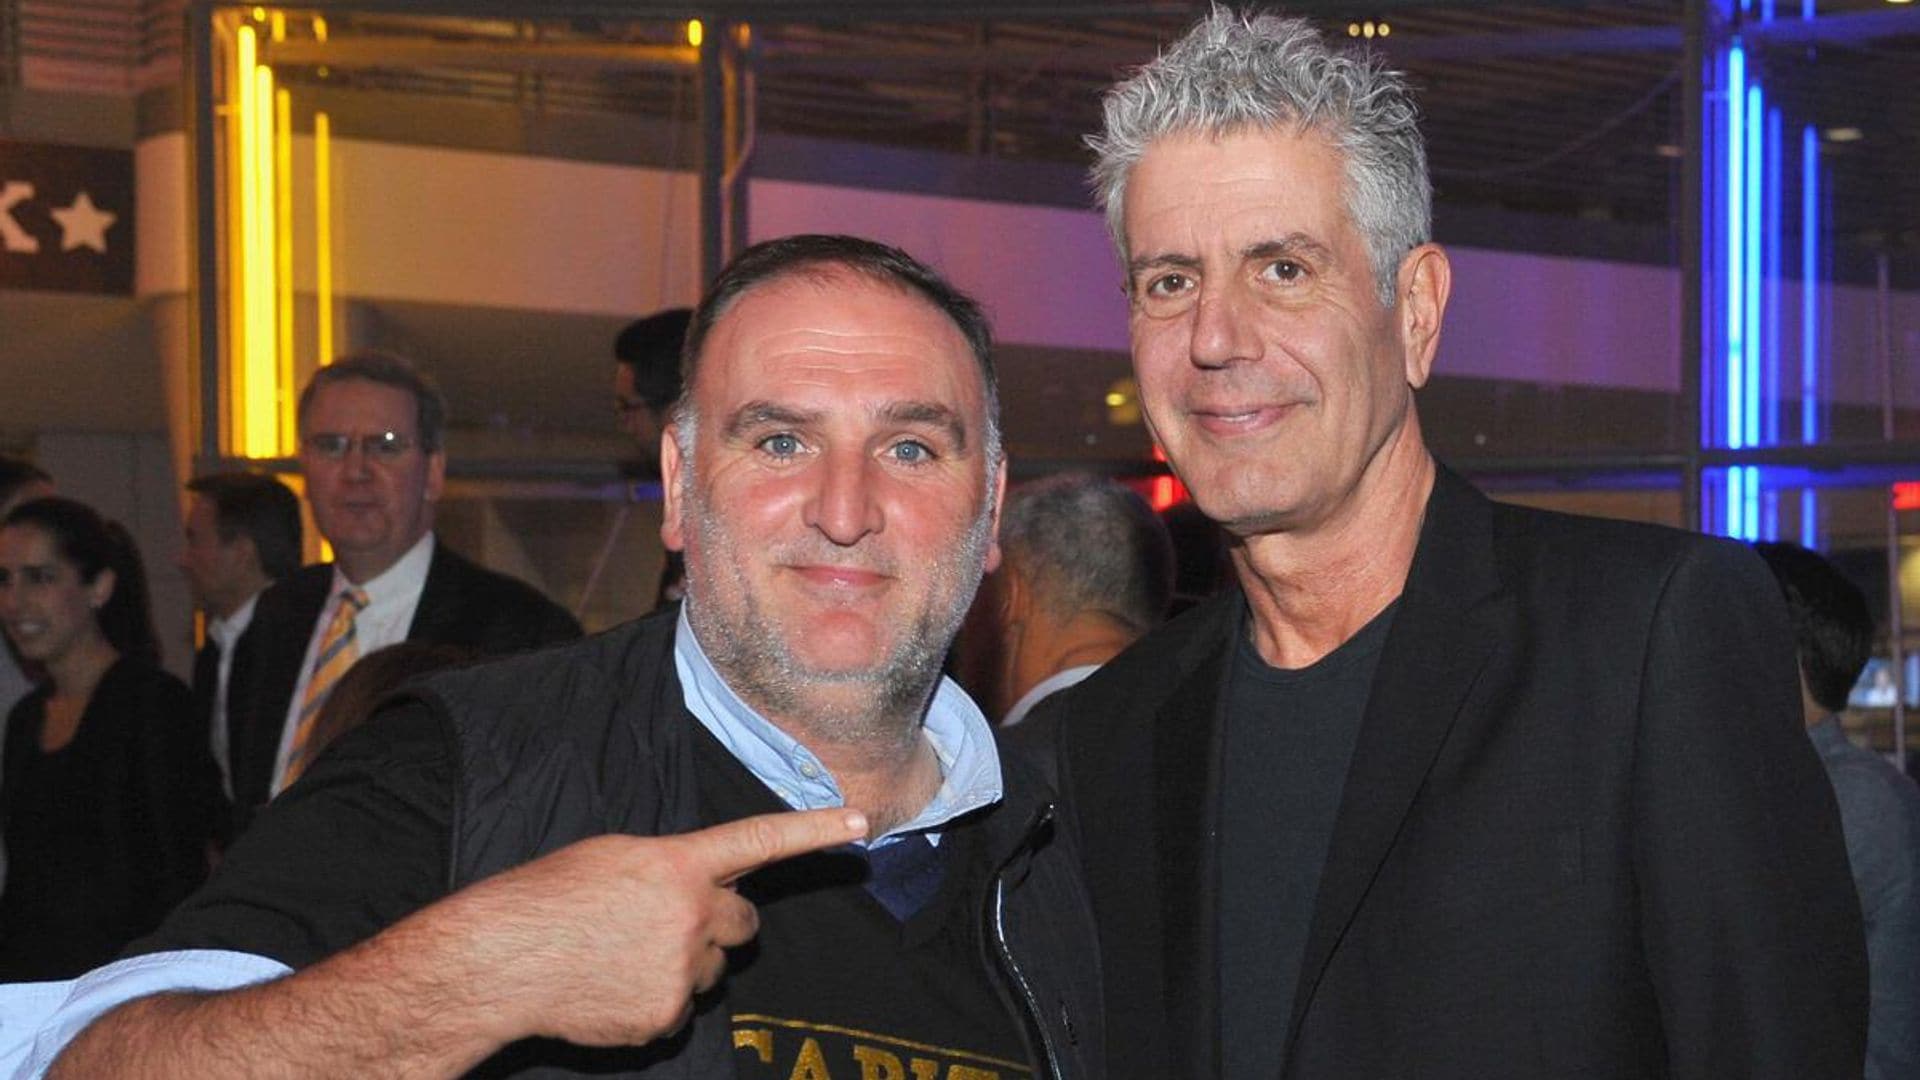 José Andrés reflects on how Anthony Bourdain inspired his new travel show